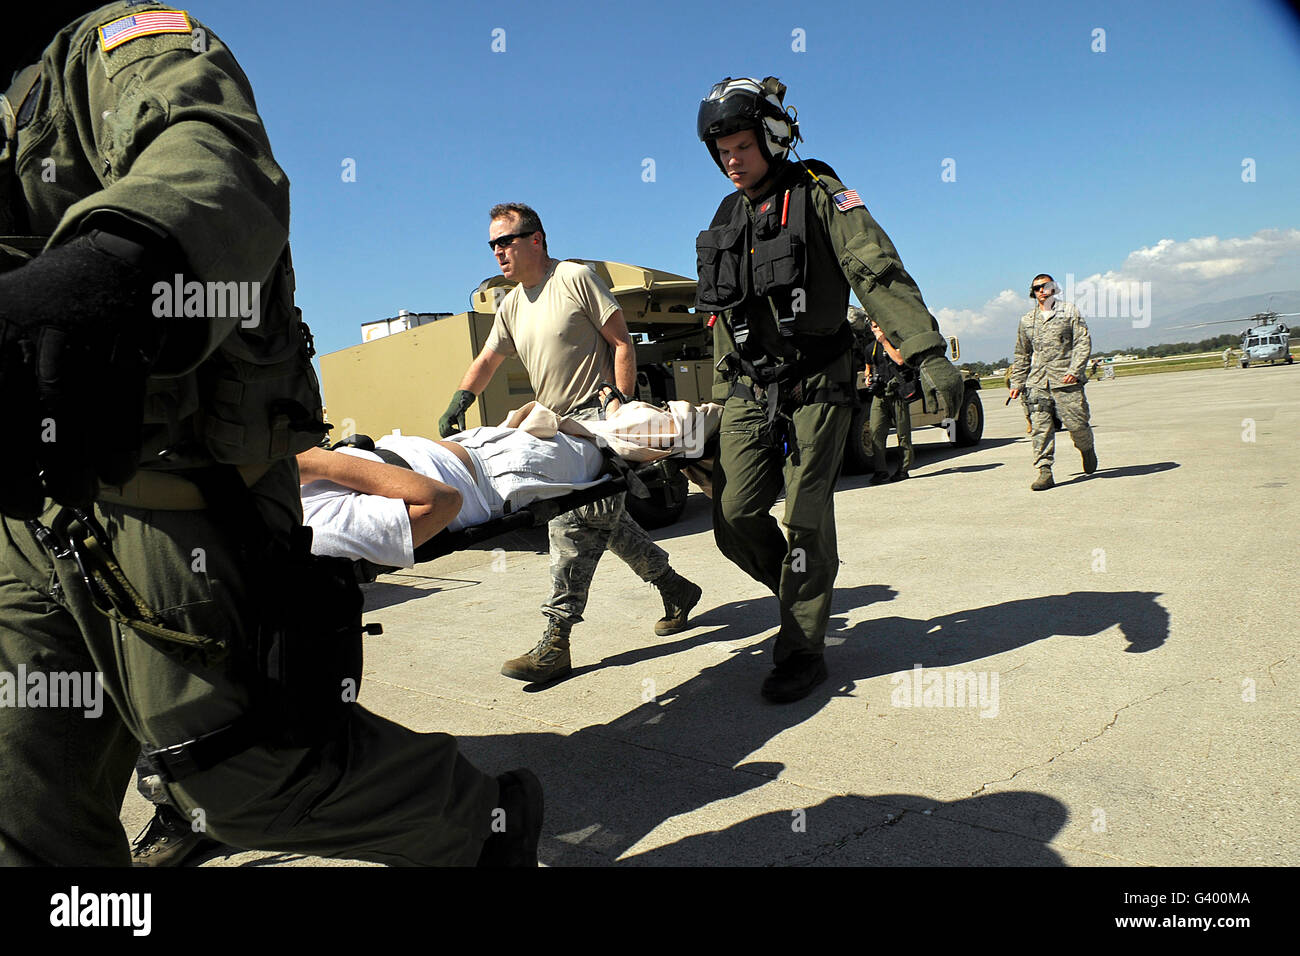 U.S. Airmen offload injured people from a C-130 Hercules aircraft. Stock Photo